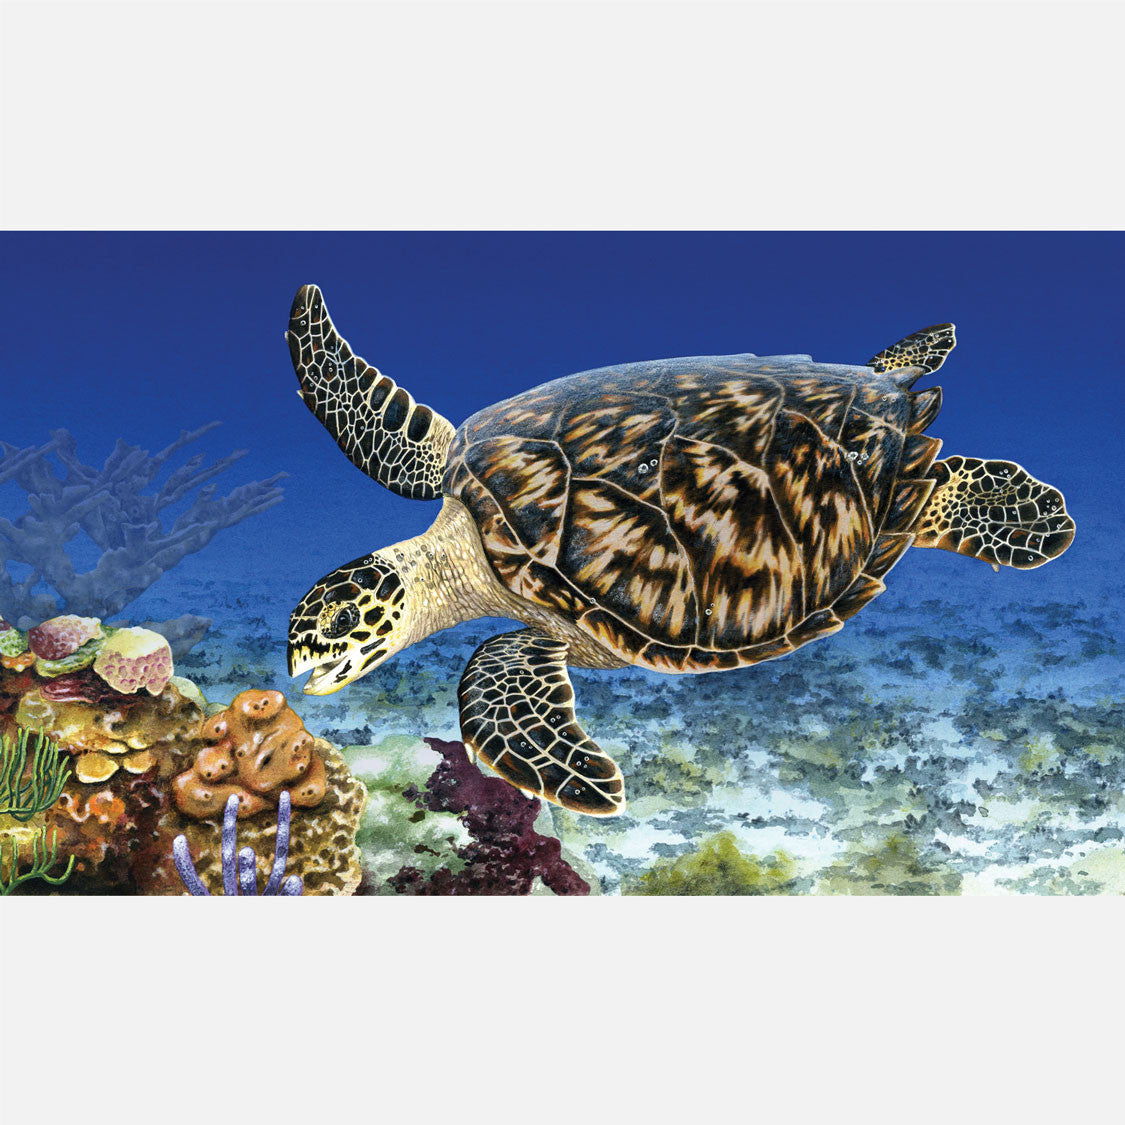 This beautiful illustration is of a hawksbill sea turtle, Eretmochelys imbricata, foraging on sponges on a coral reef.